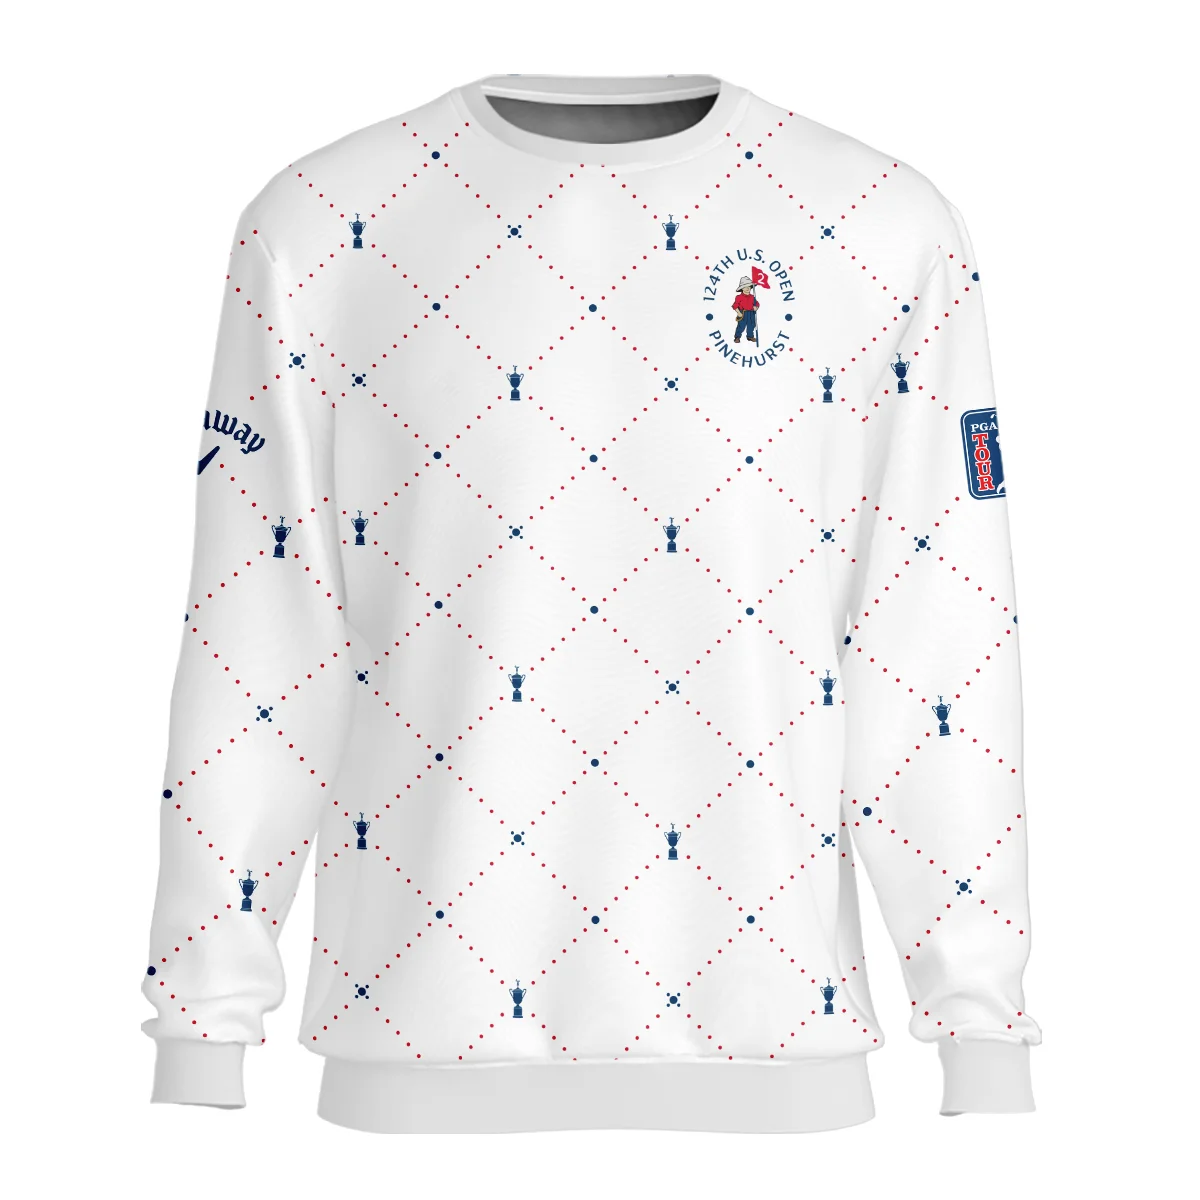 Argyle Pattern With Cup 124th U.S. Open Pinehurst Callaway Hoodie Shirt Style Classic Hoodie Shirt